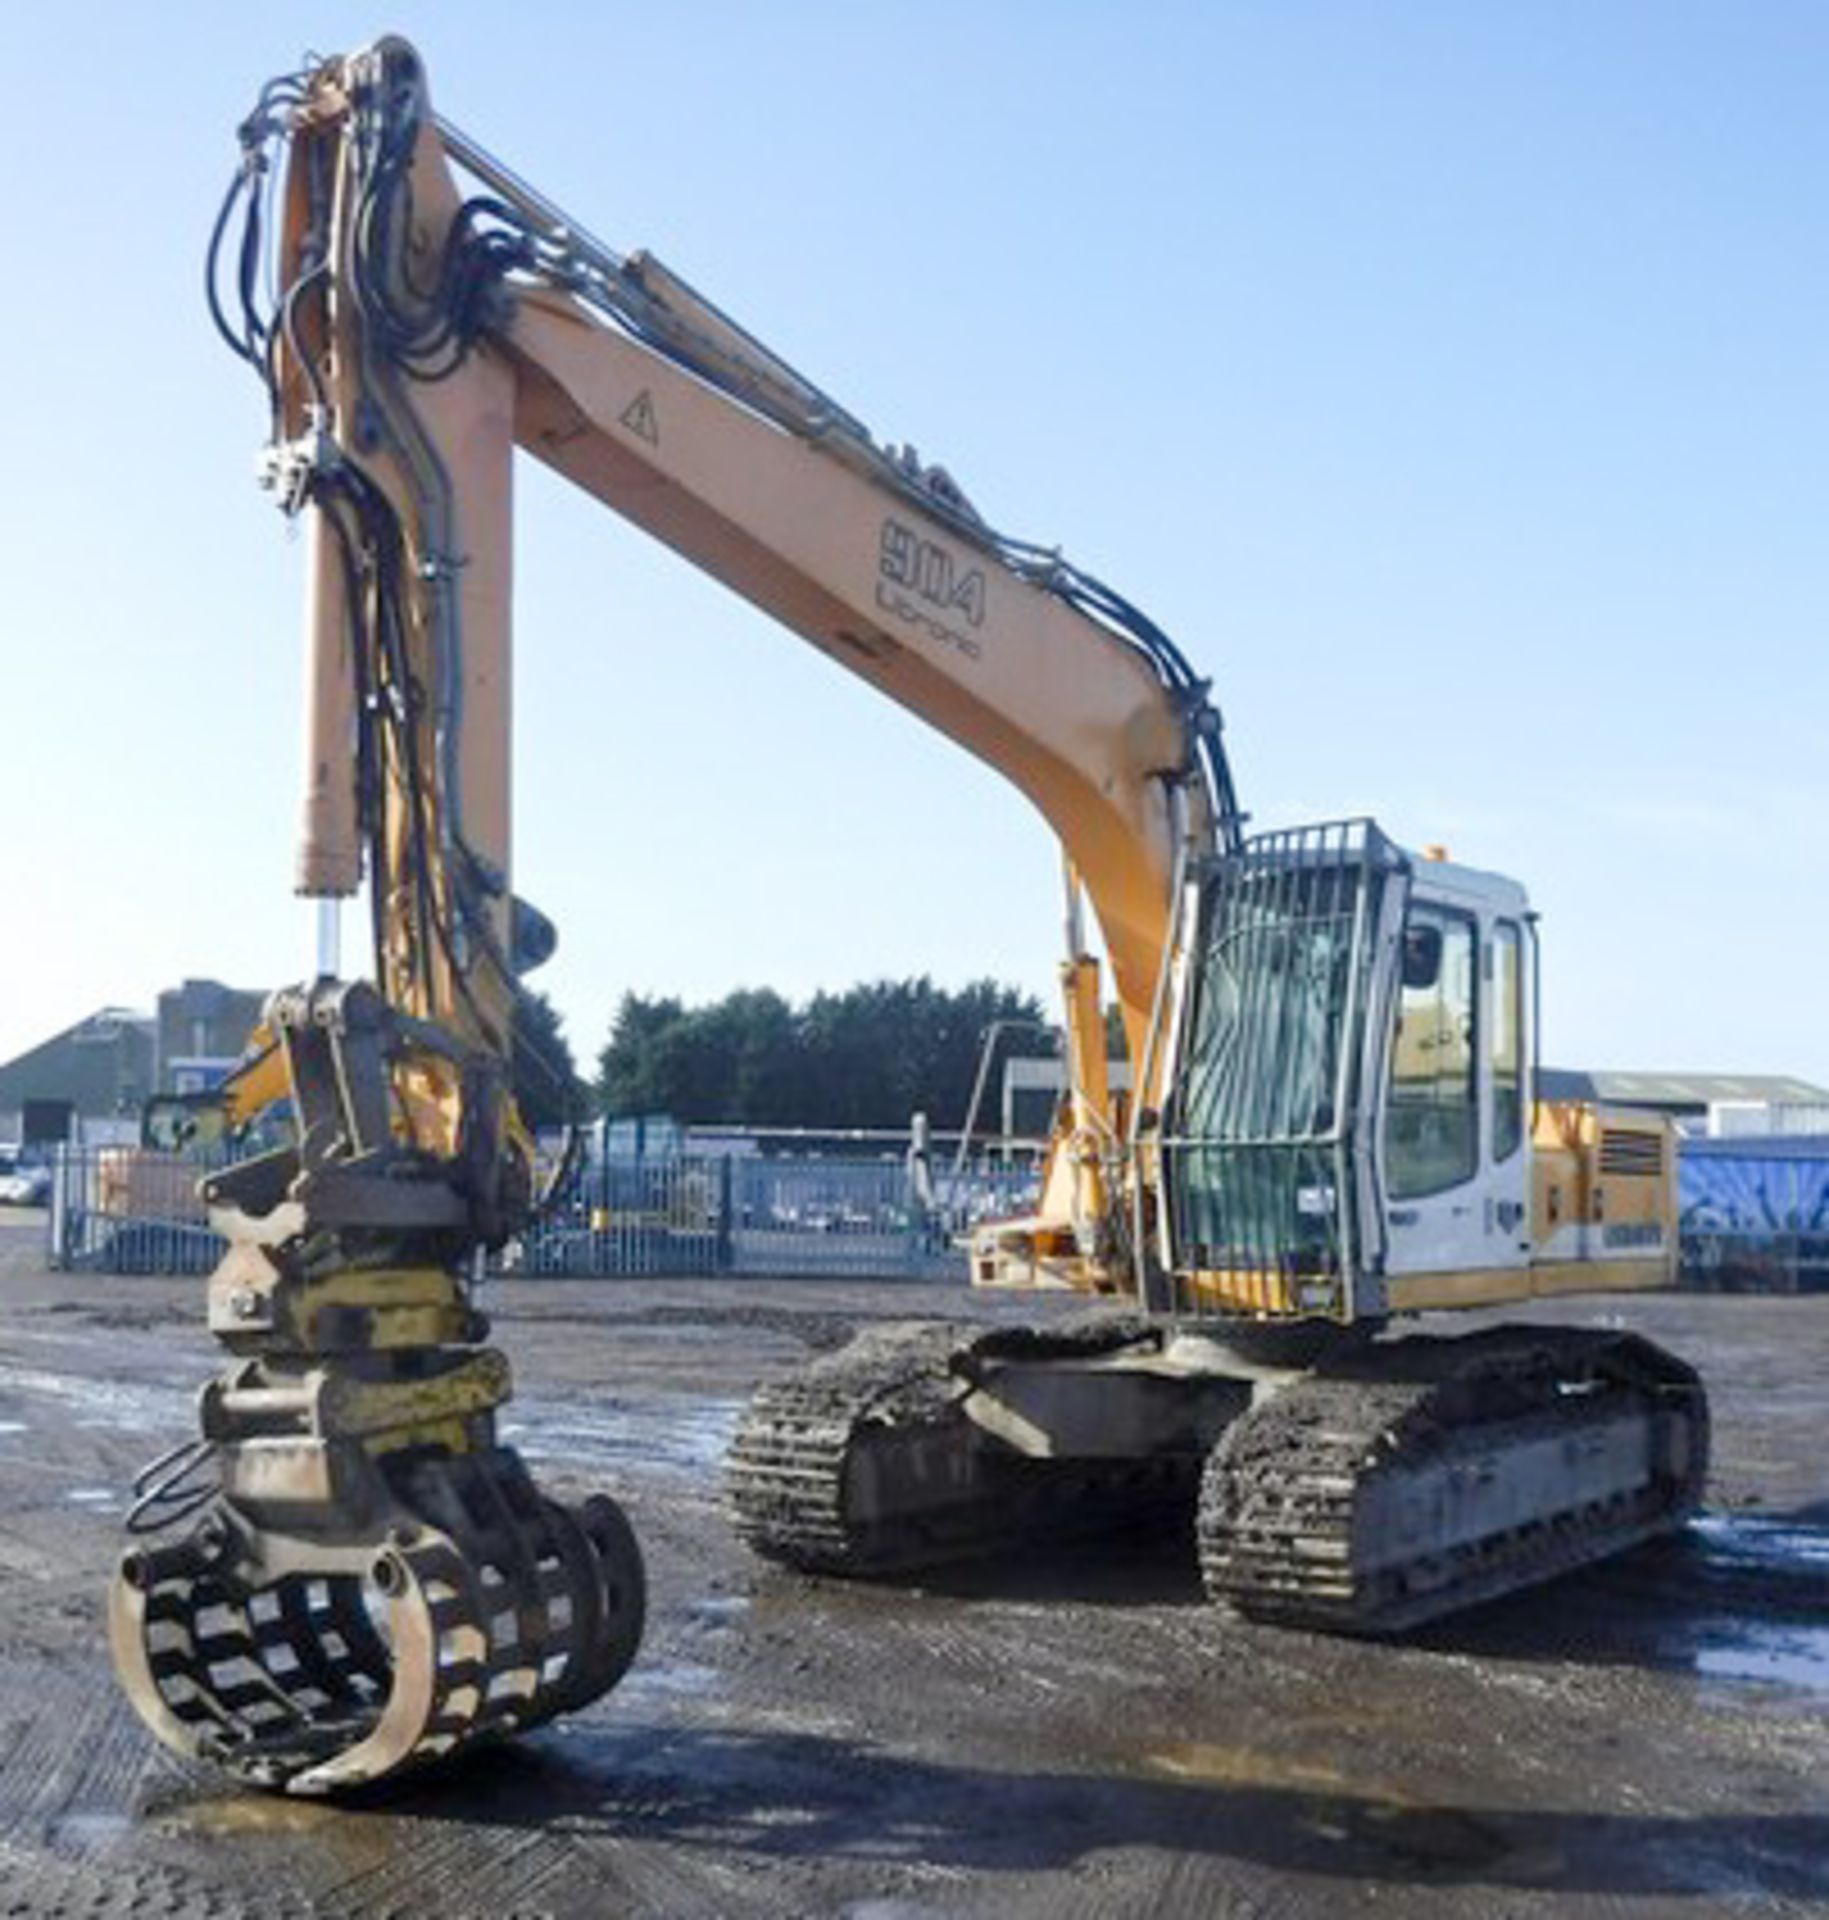 2004 LIEBHERR R-904, S/N 668-12514, 8364HRS (NOT VERIFIED), ENGCON GRAB, MAX REACH 8.4M, FITTED WITH